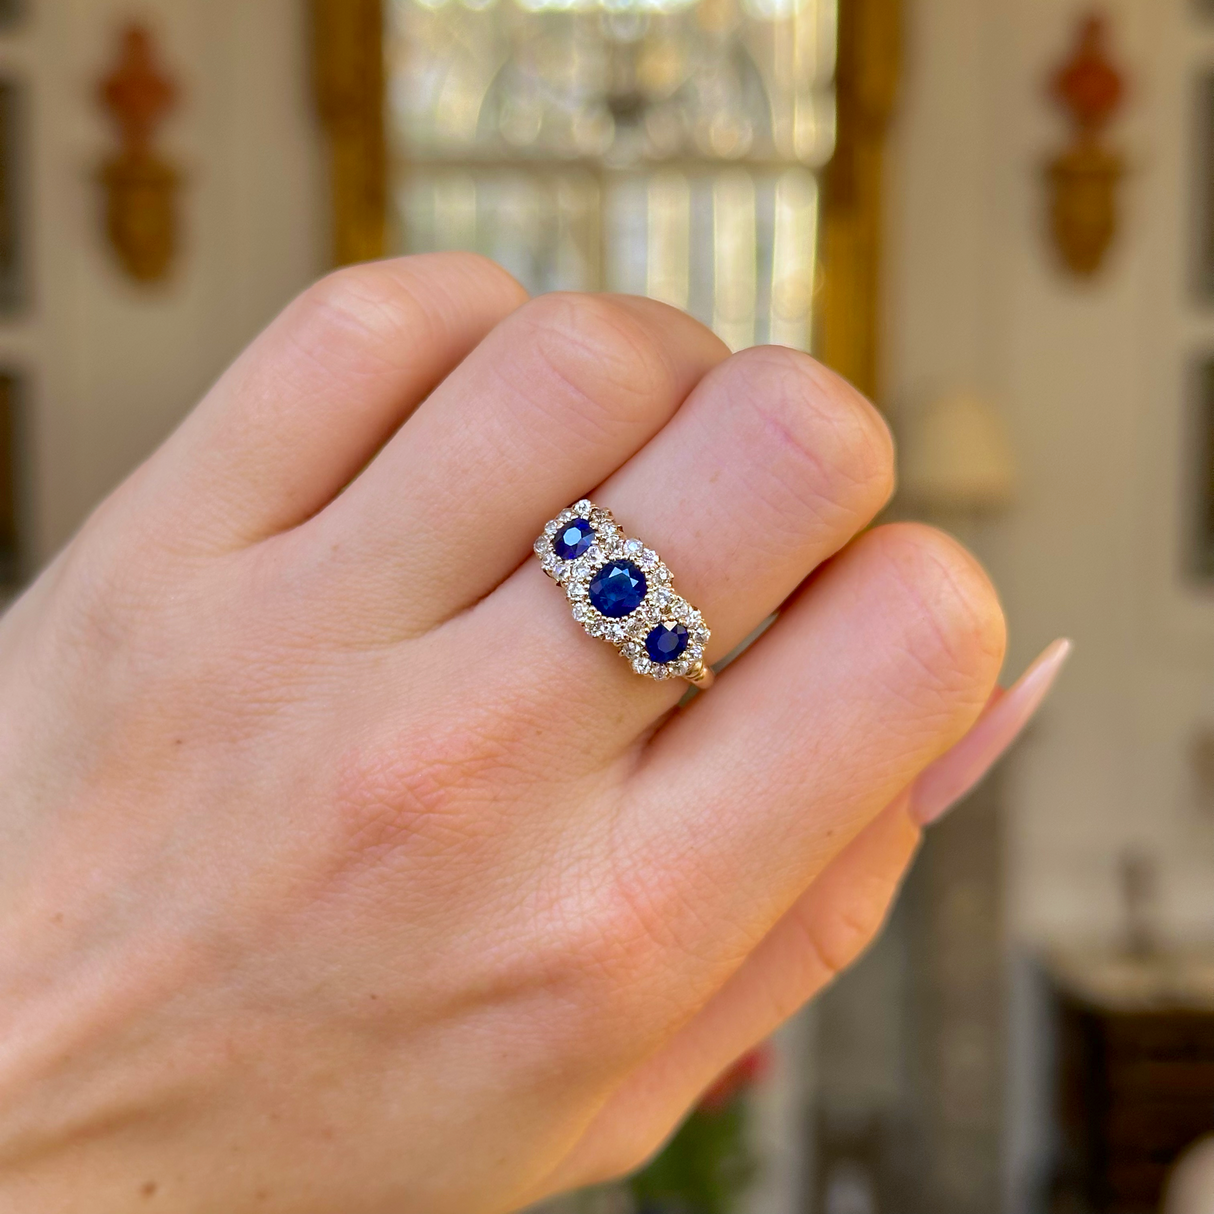 sapphire and diamond triple cluster ring worn on closed hand.